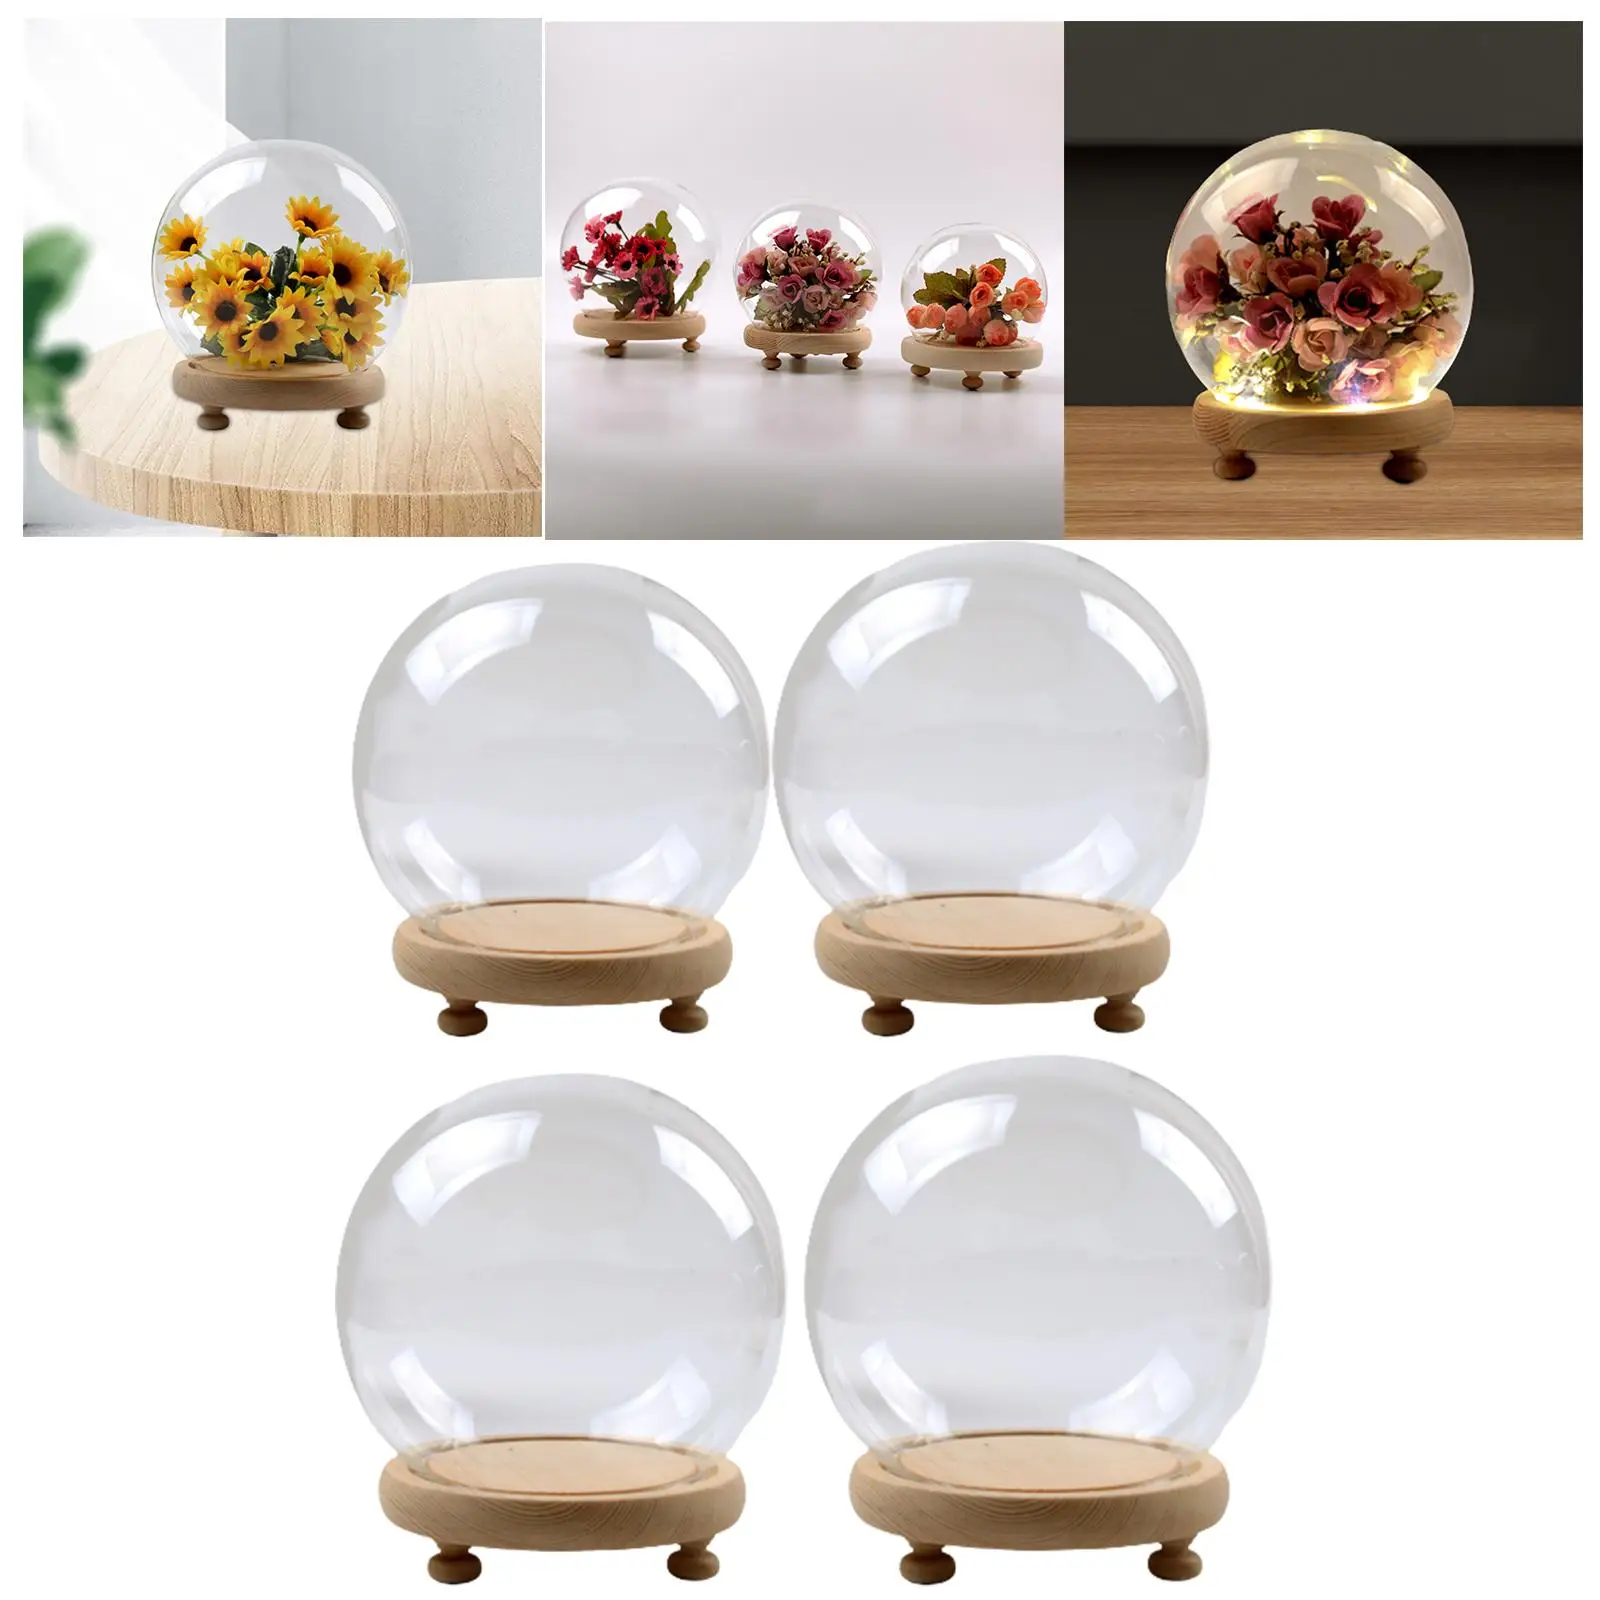 Display Dome with Wooden Base Jewelry Display Anniversary Gifts Glass Dome